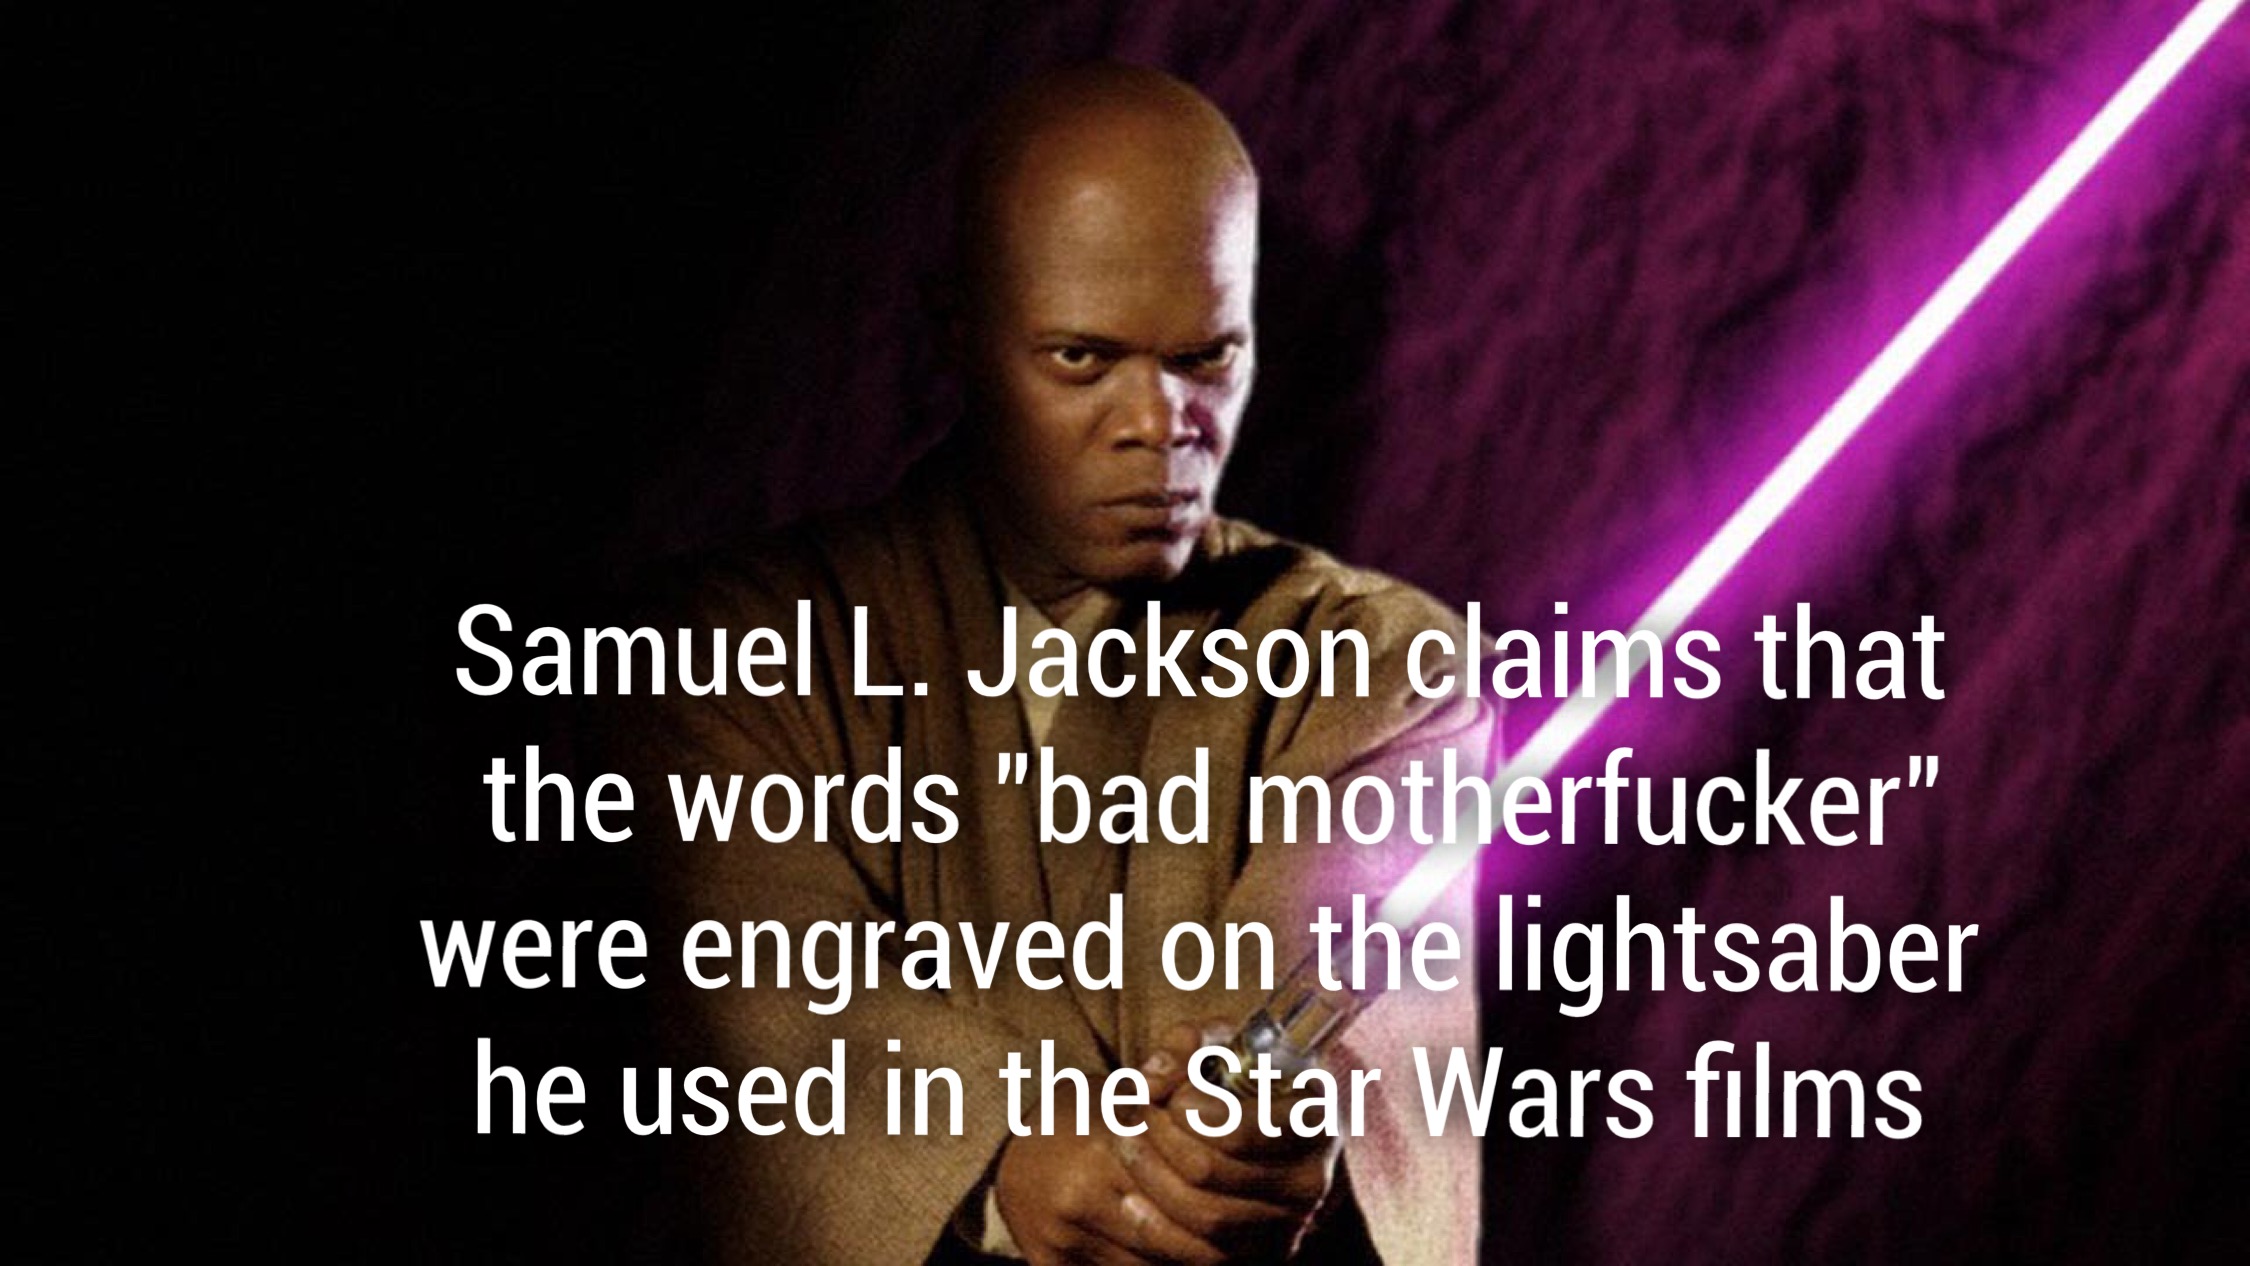 photo caption - Samuel L. Jackson claims that the words "bad motherfucker" were engraved on the lightsaber he used in the Star Wars films